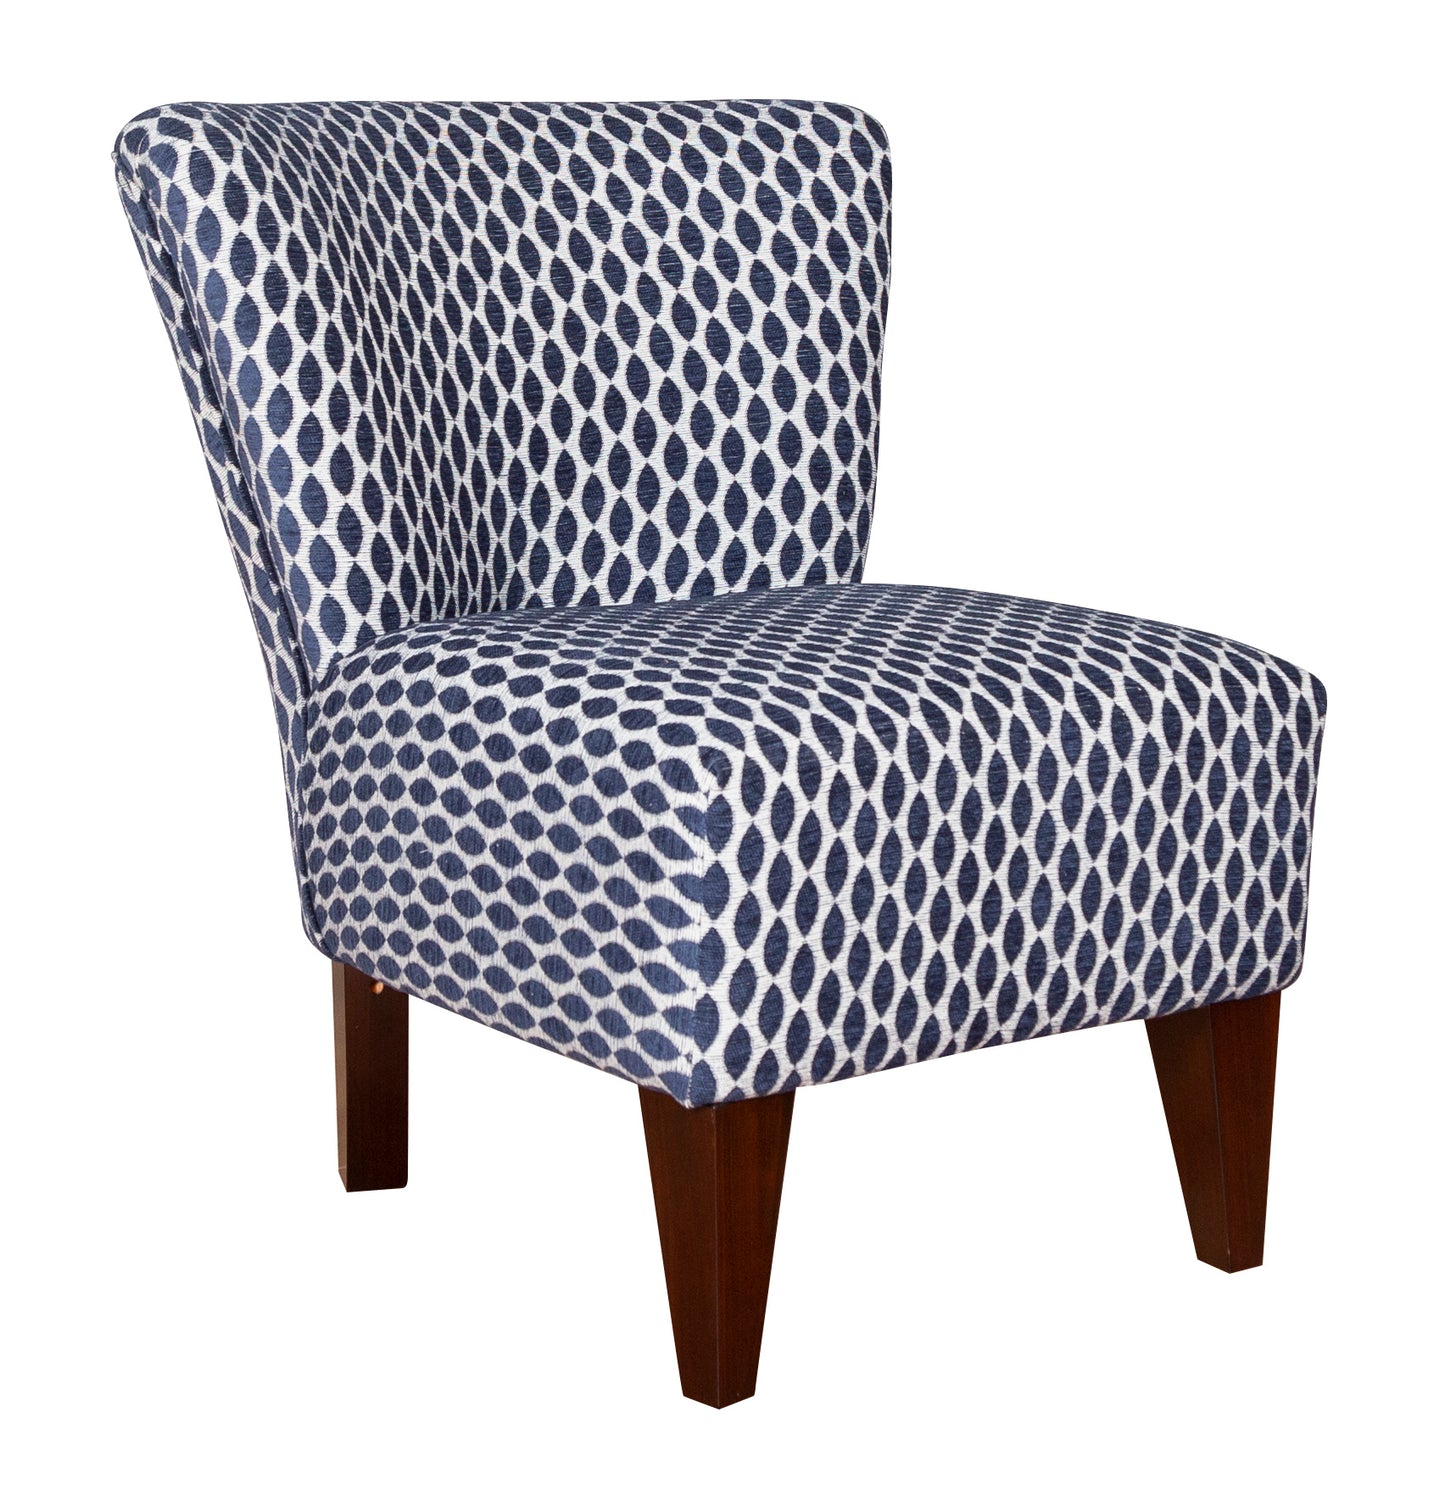 Lola George Patterned Accent Chair